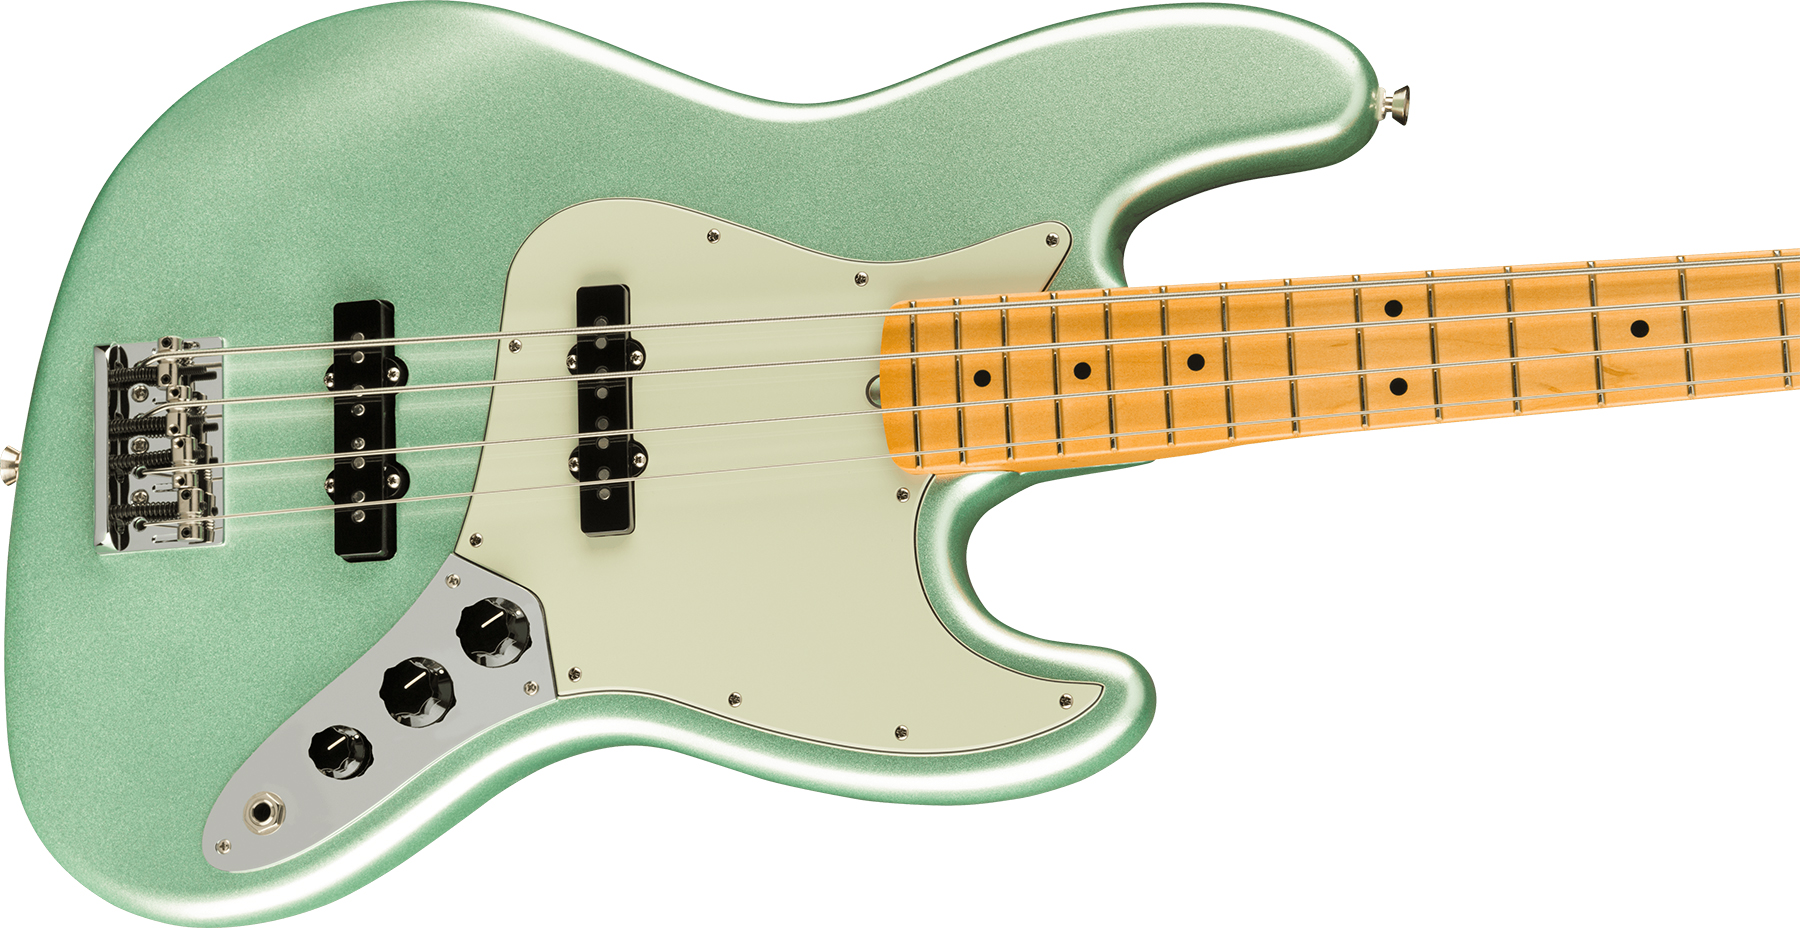 Fender Jazz Bass American Professional Ii Usa Mn - Mystic Surf Green - Basse Électrique Solid Body - Variation 2